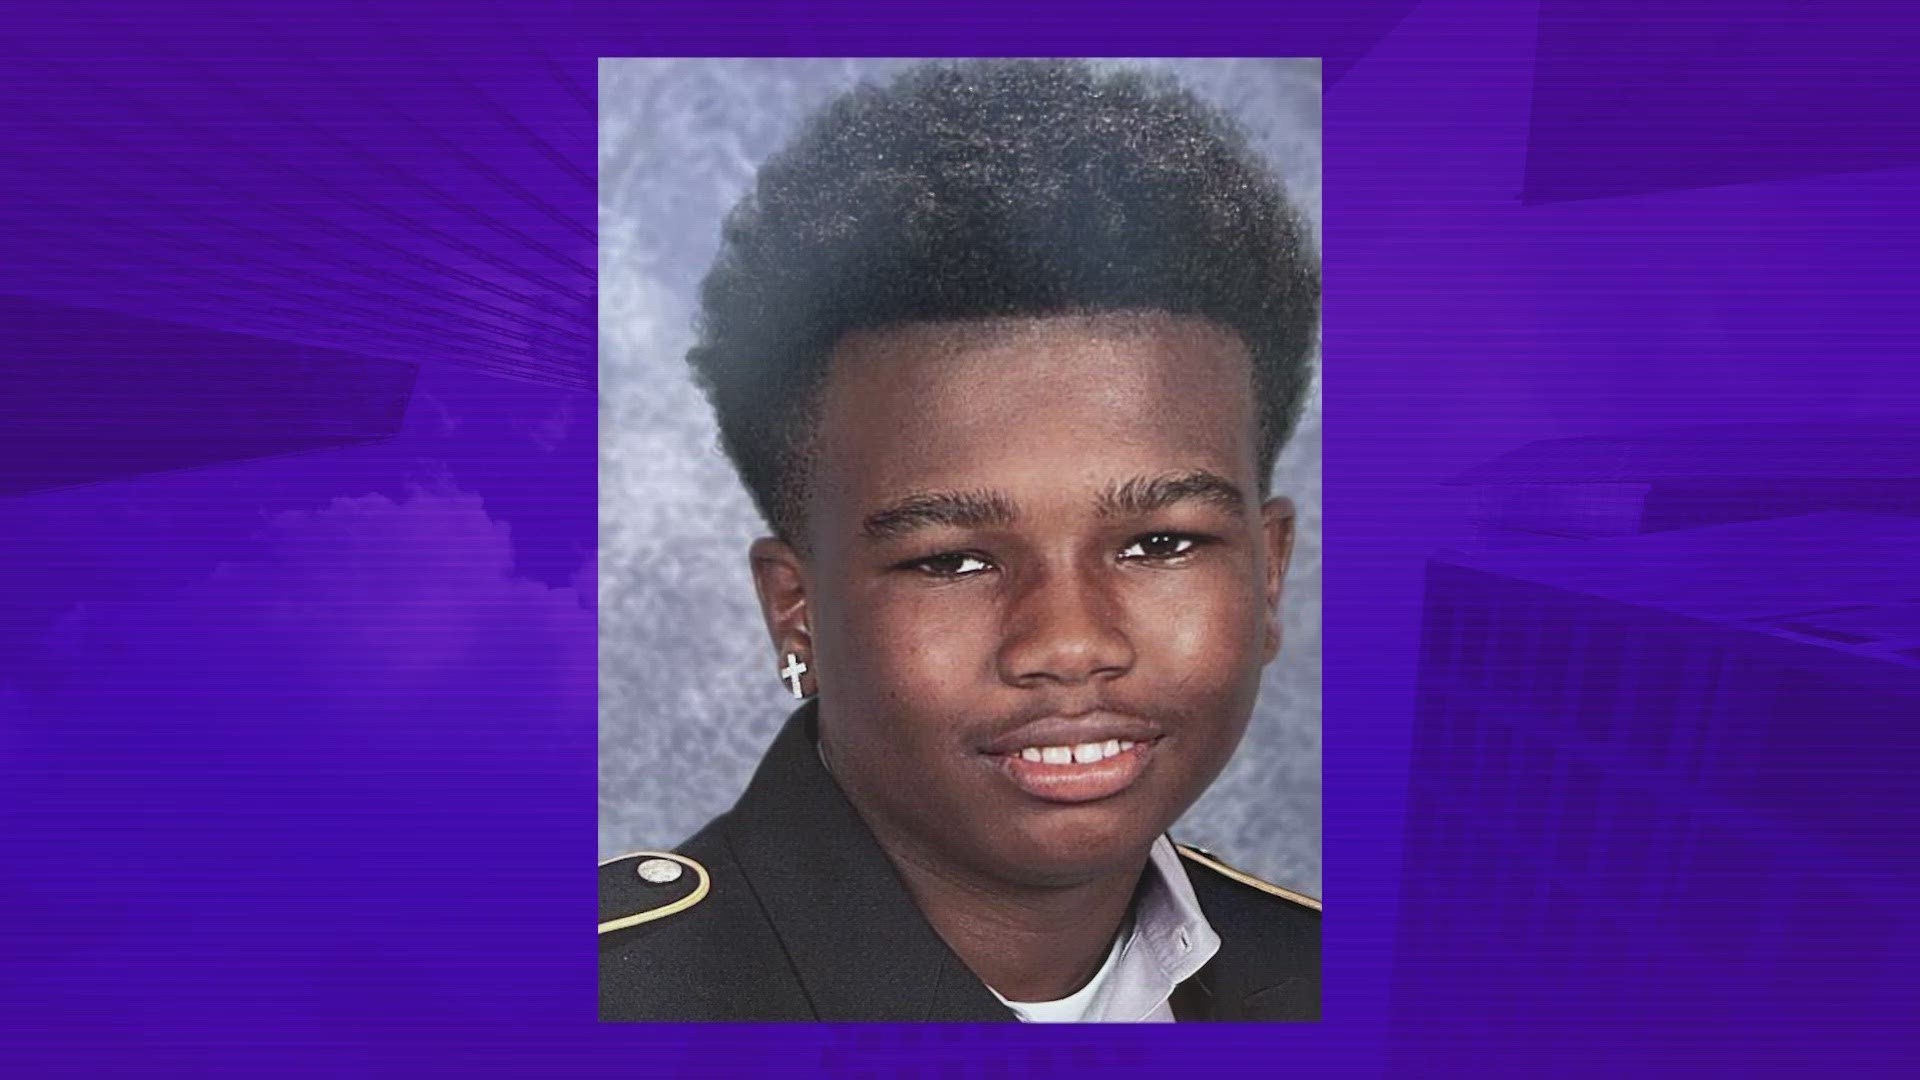 The student was shot and killed Feb. 28 outside the Kendrick Apartments in Dallas